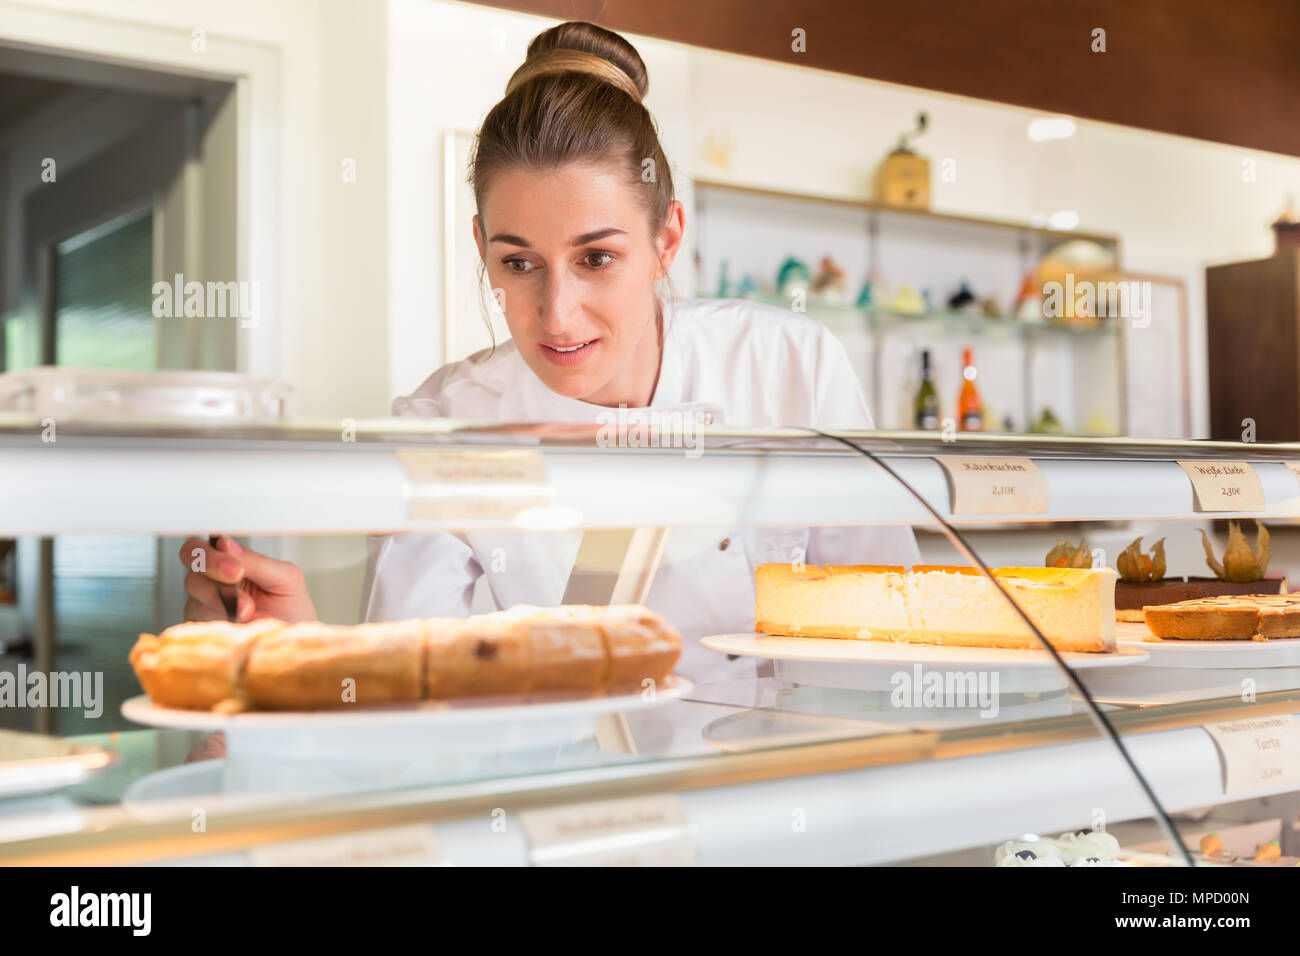 Sales woman in bakery shop putting cakes on display Stock Photo